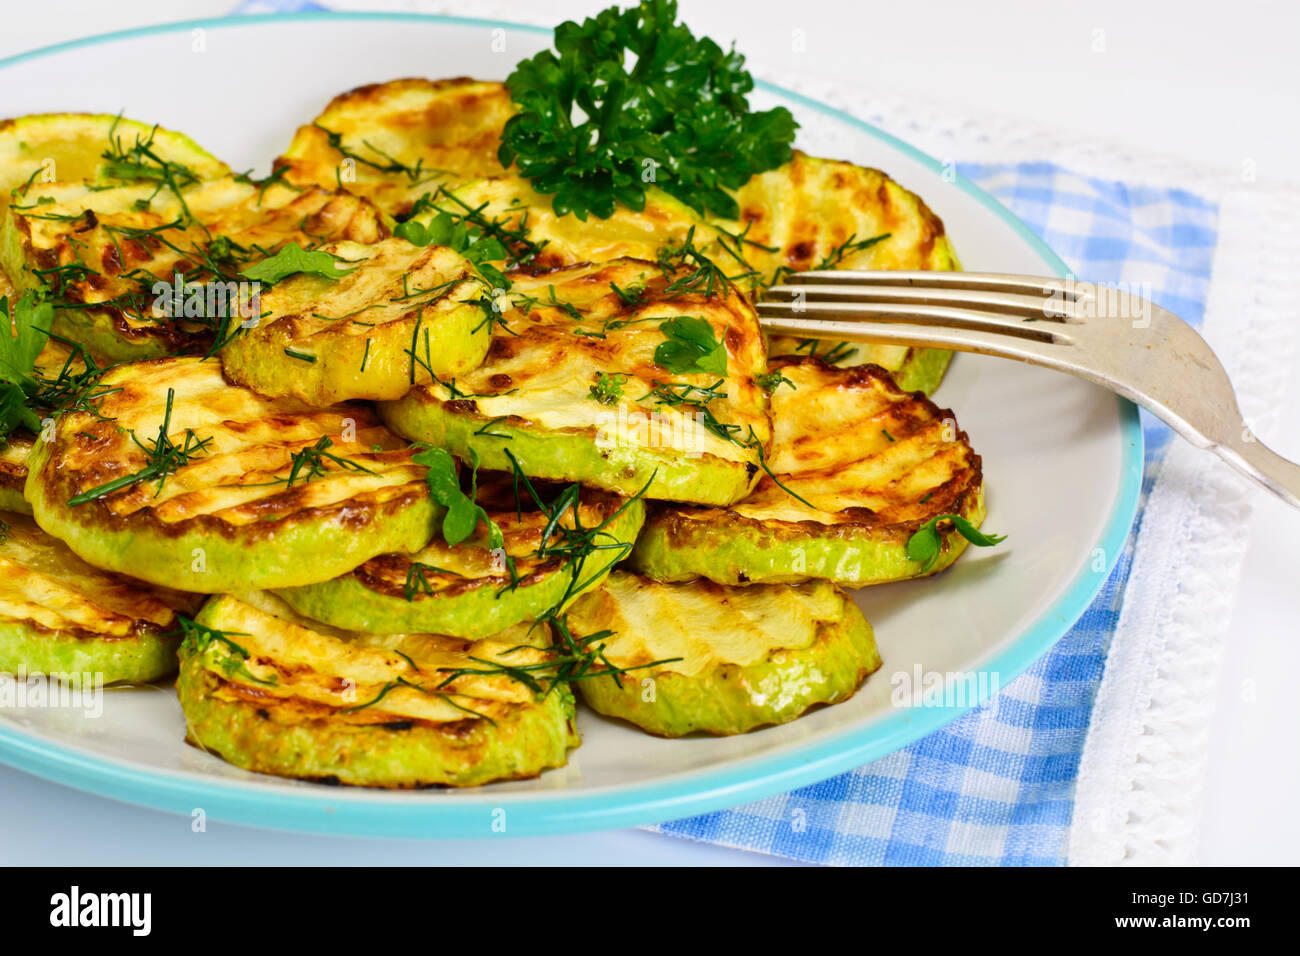 Zucchini Grilled with Fennel Stock Photo